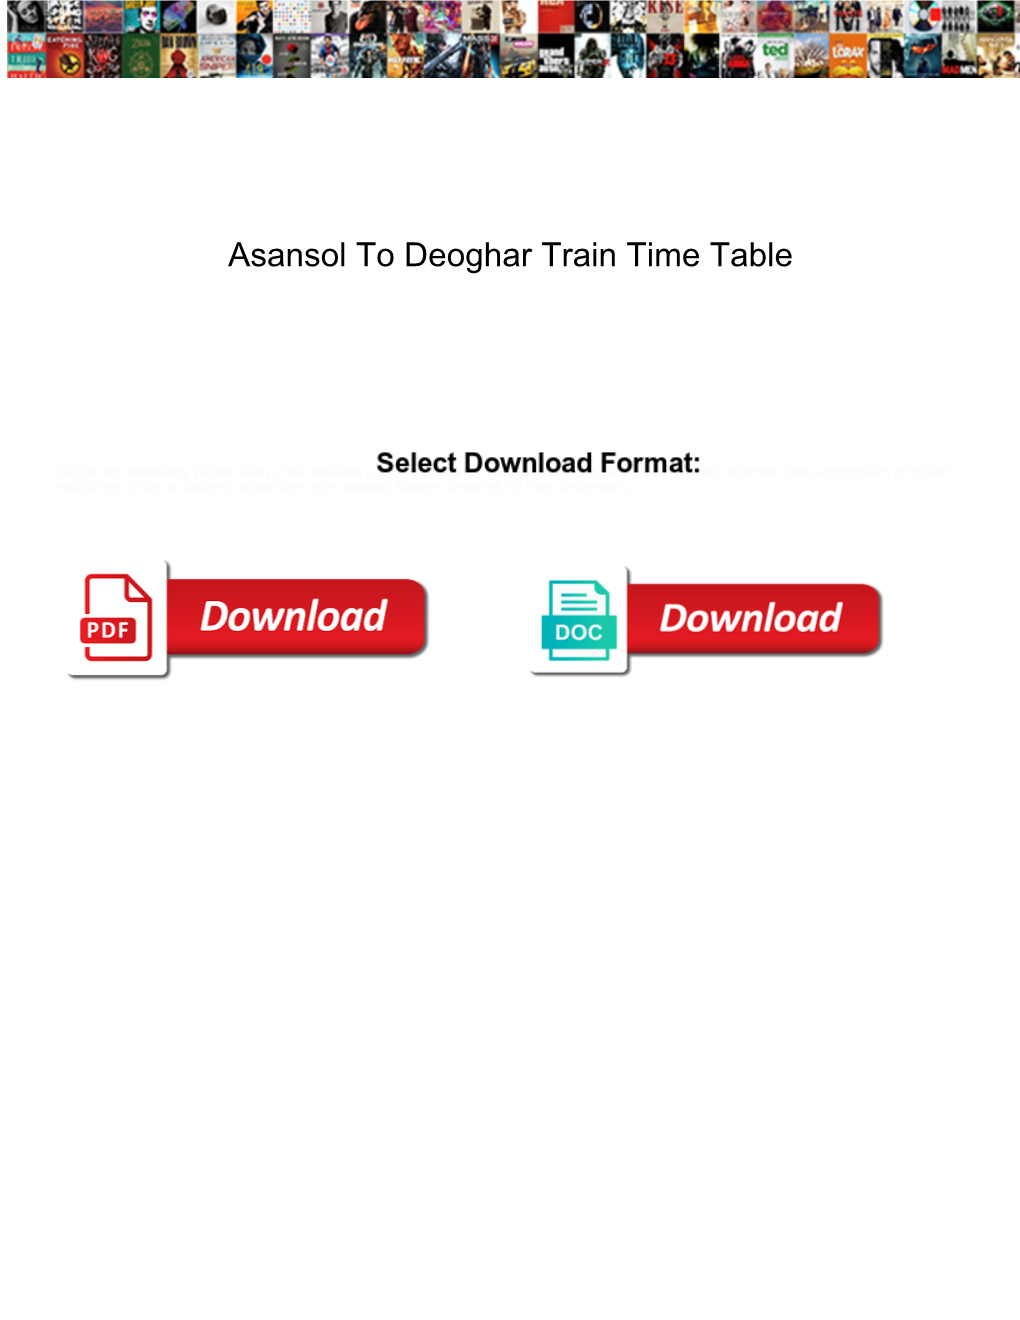 Asansol to Deoghar Train Time Table